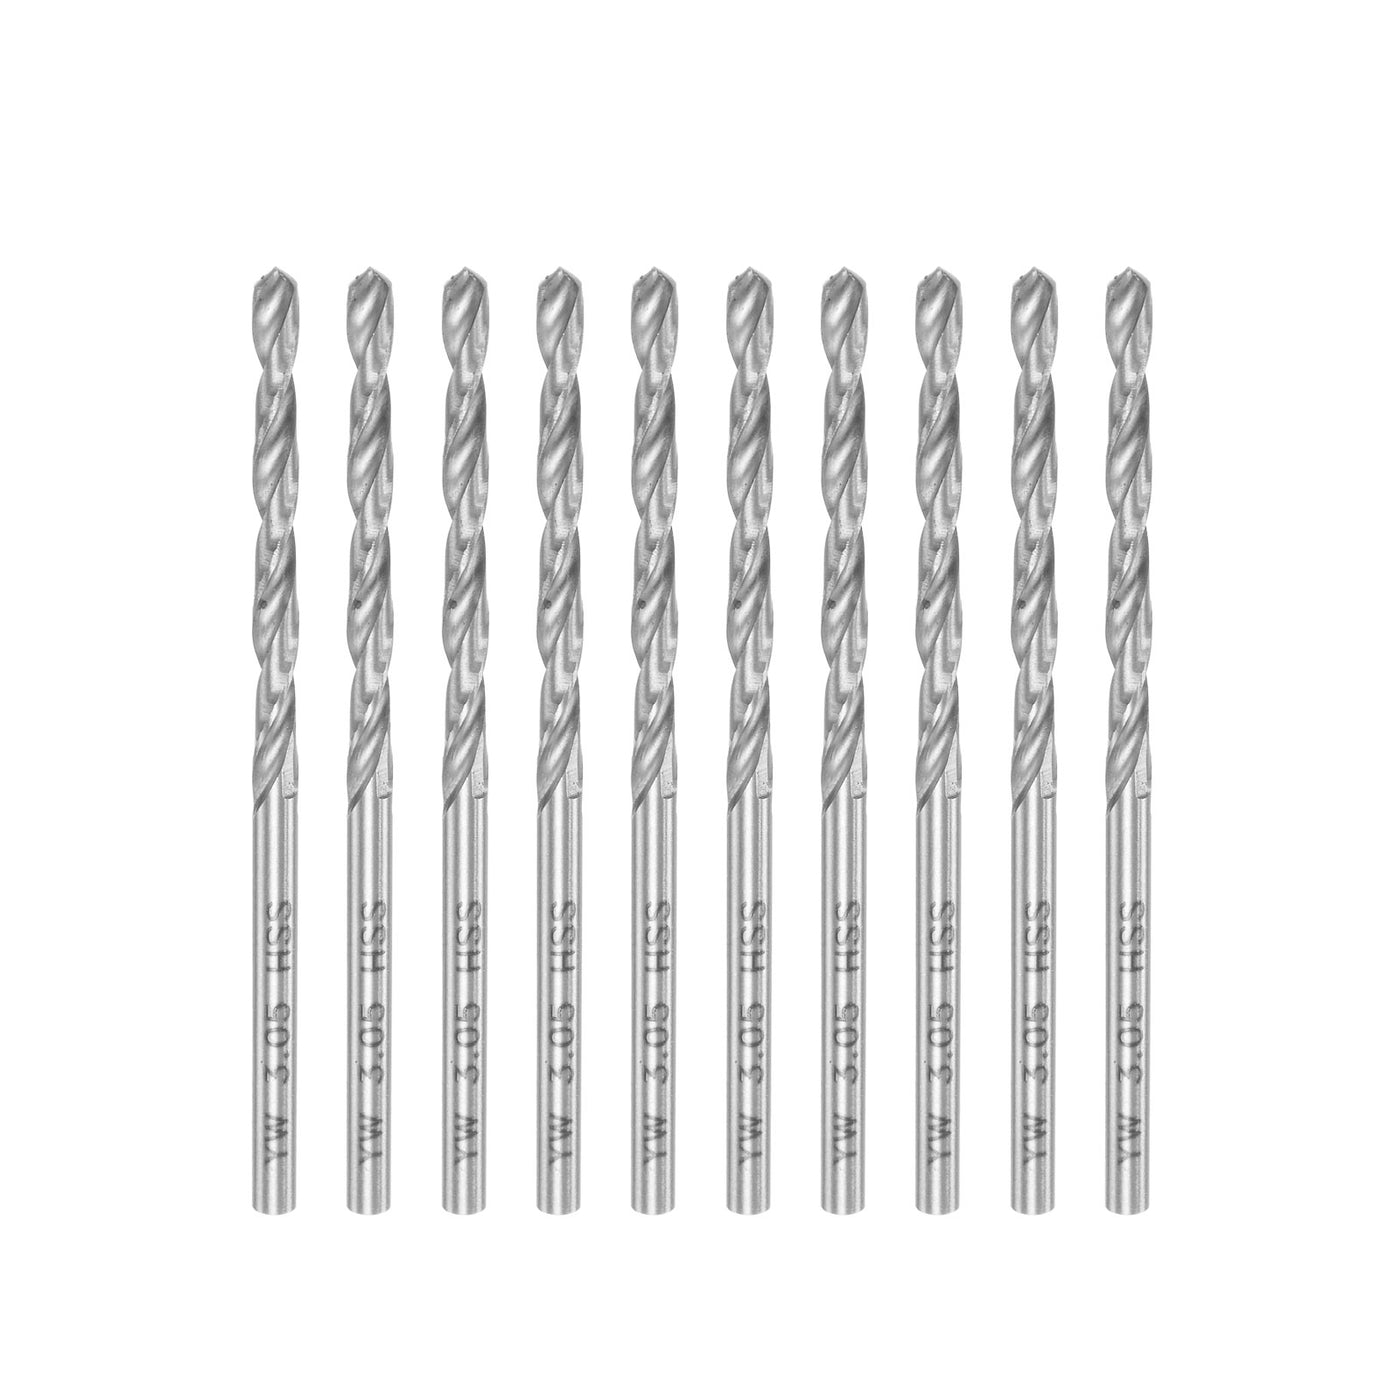 uxcell Uxcell 10 Pcs 3.05mm High Speed Steel Drill Bits, Fully Ground 60mm Length Drill Bit